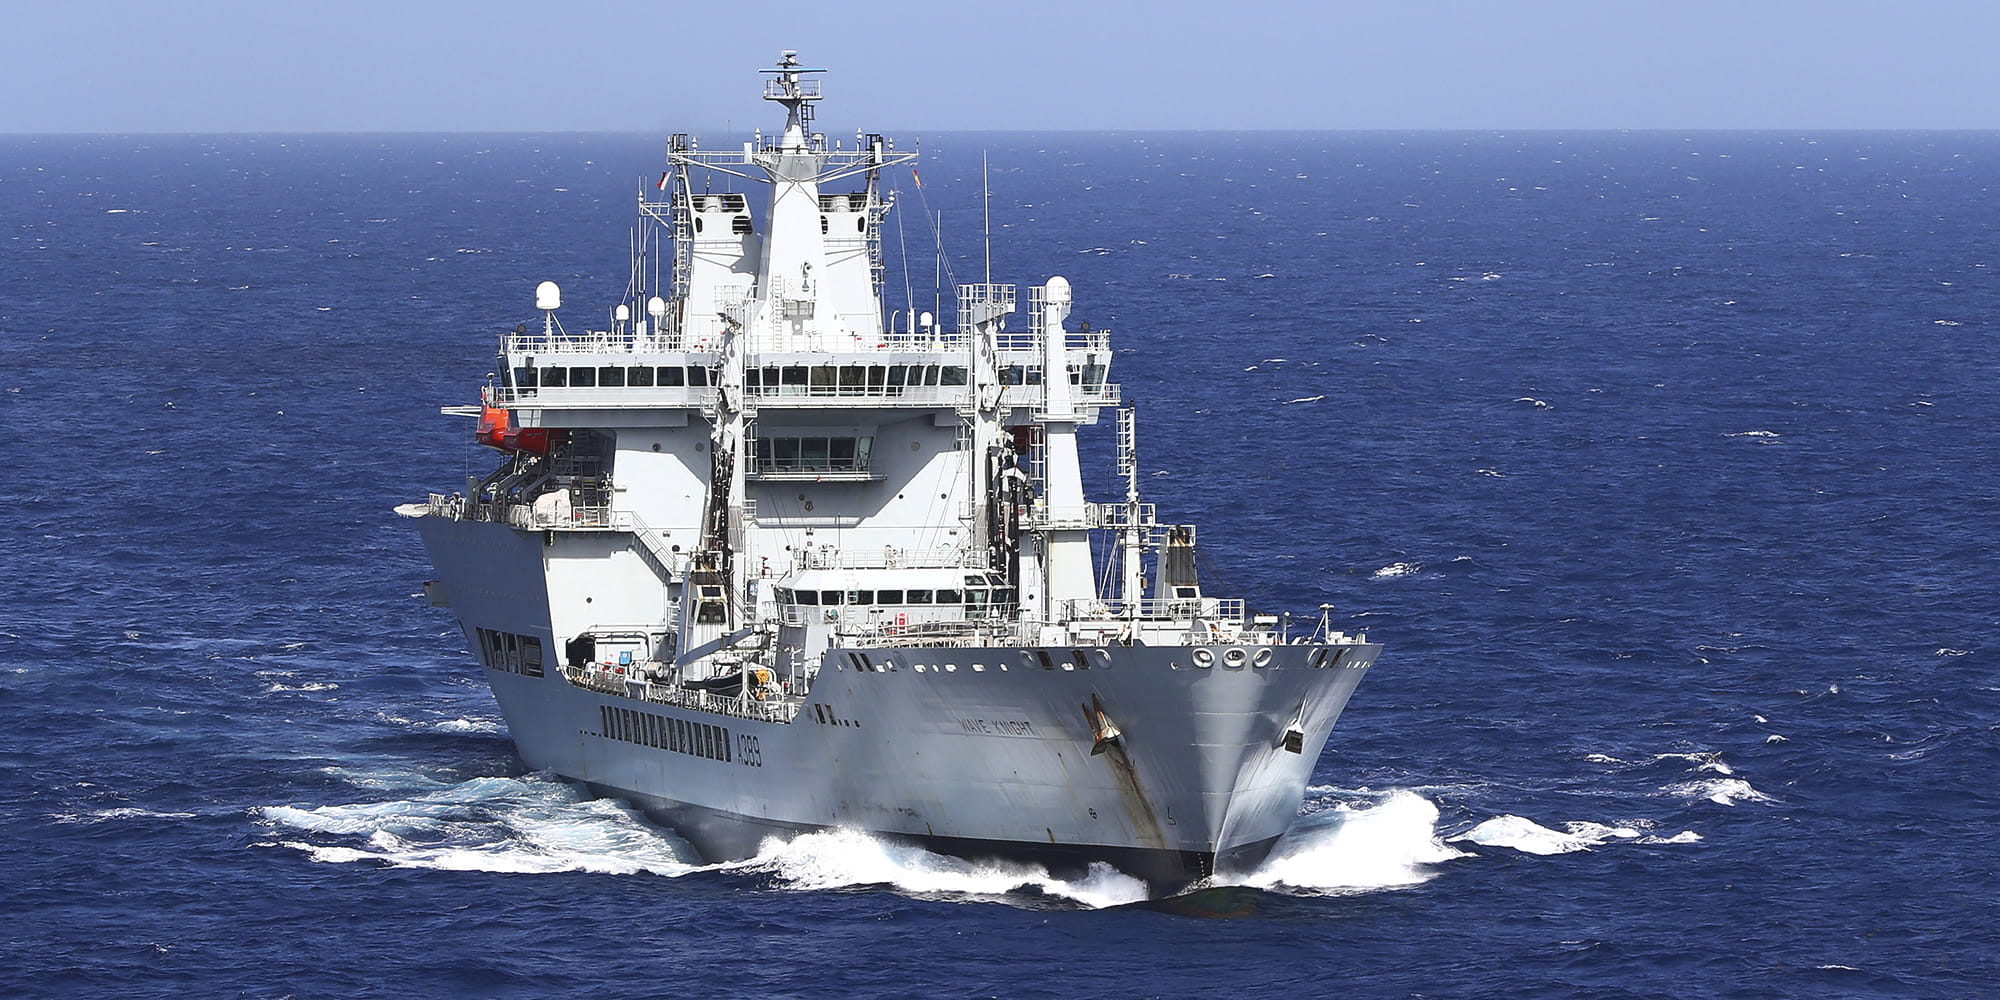 RFA Wave Knight carried out a Replenishment at Sea (RAS)